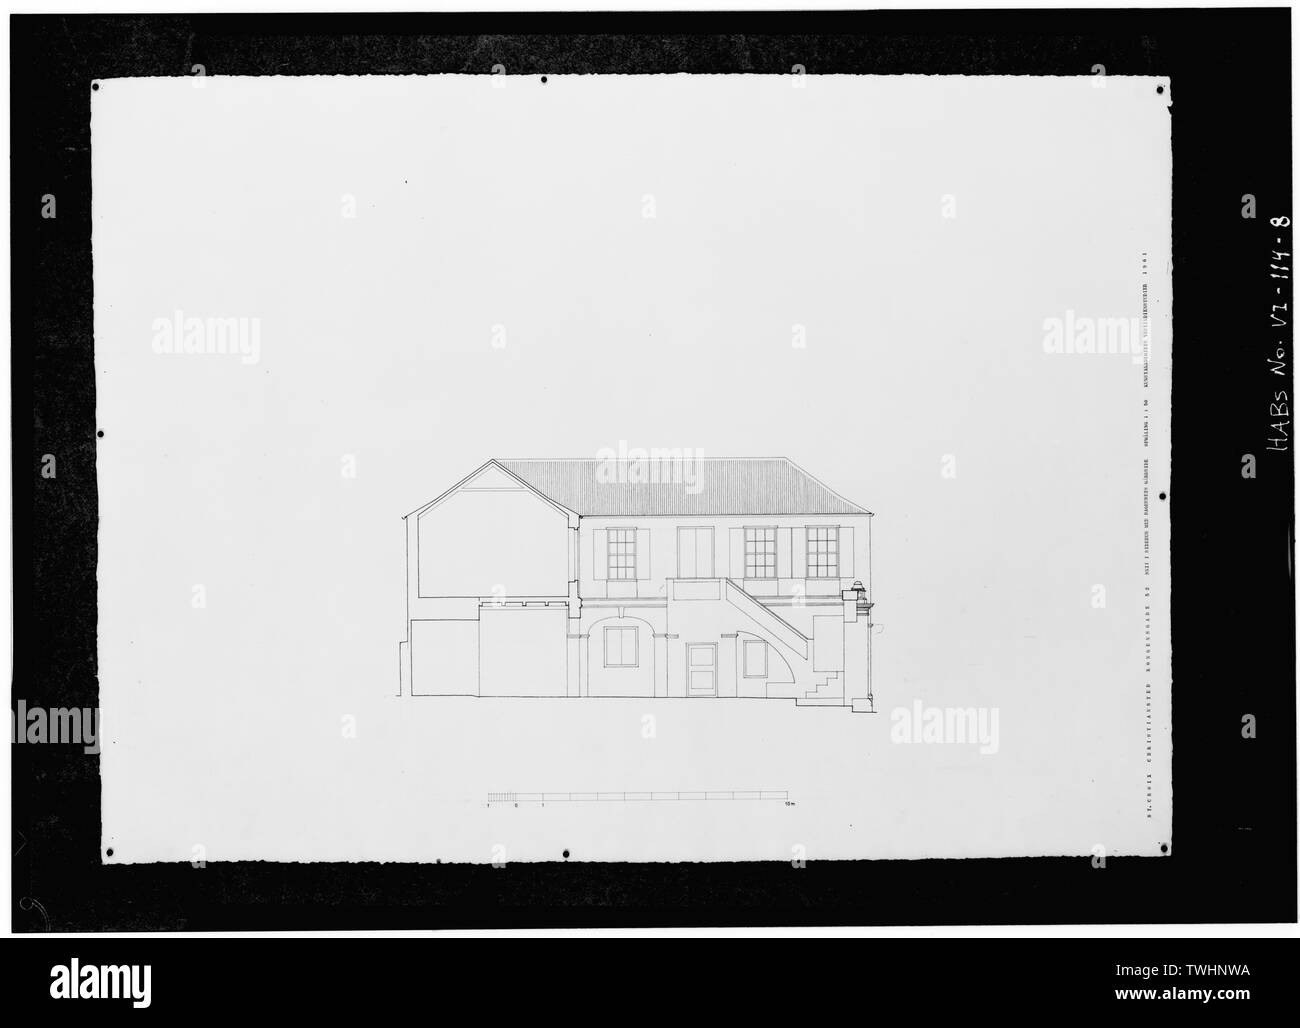 SECTION THROUGH SIDE PORTION OF WING AND ELEVATION OF REAR PORTION - Kongensgade 52 (House), 52 King Street, Christiansted, St. Croix, VI Stock Photo